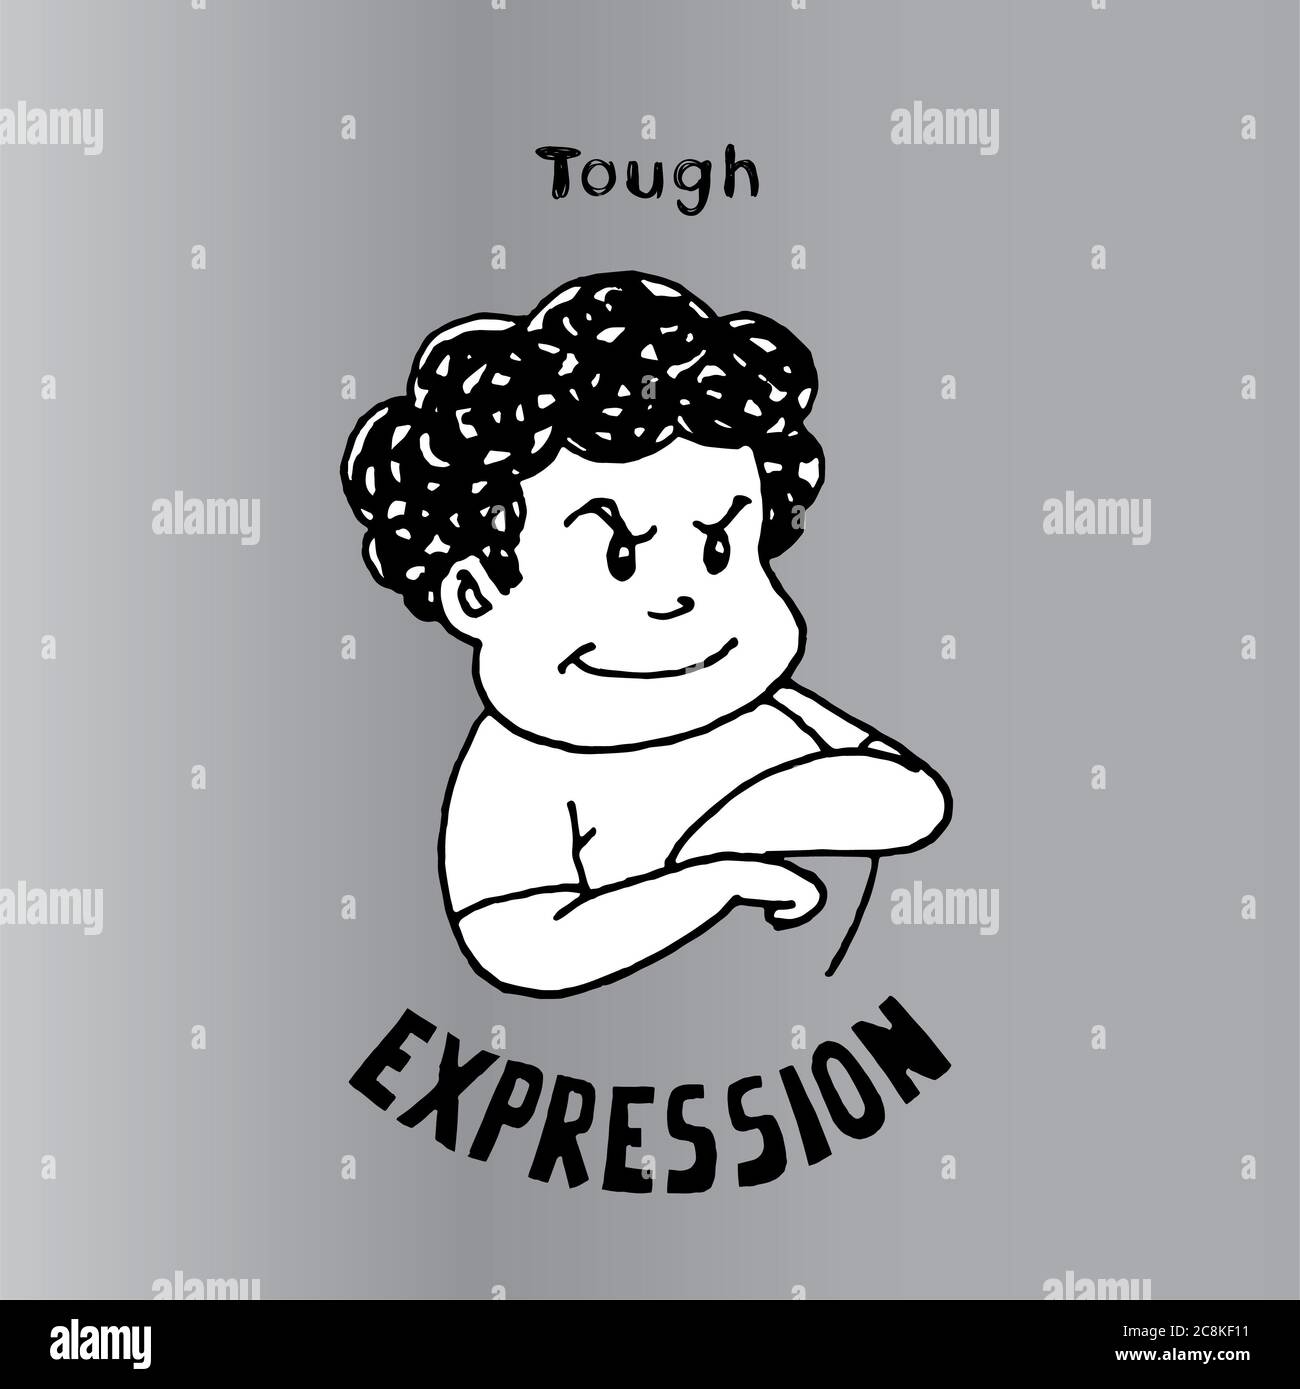 Tough kid face vector illustration. Interesting cartoon character. Used as emoticons and emojis. Stock Photo